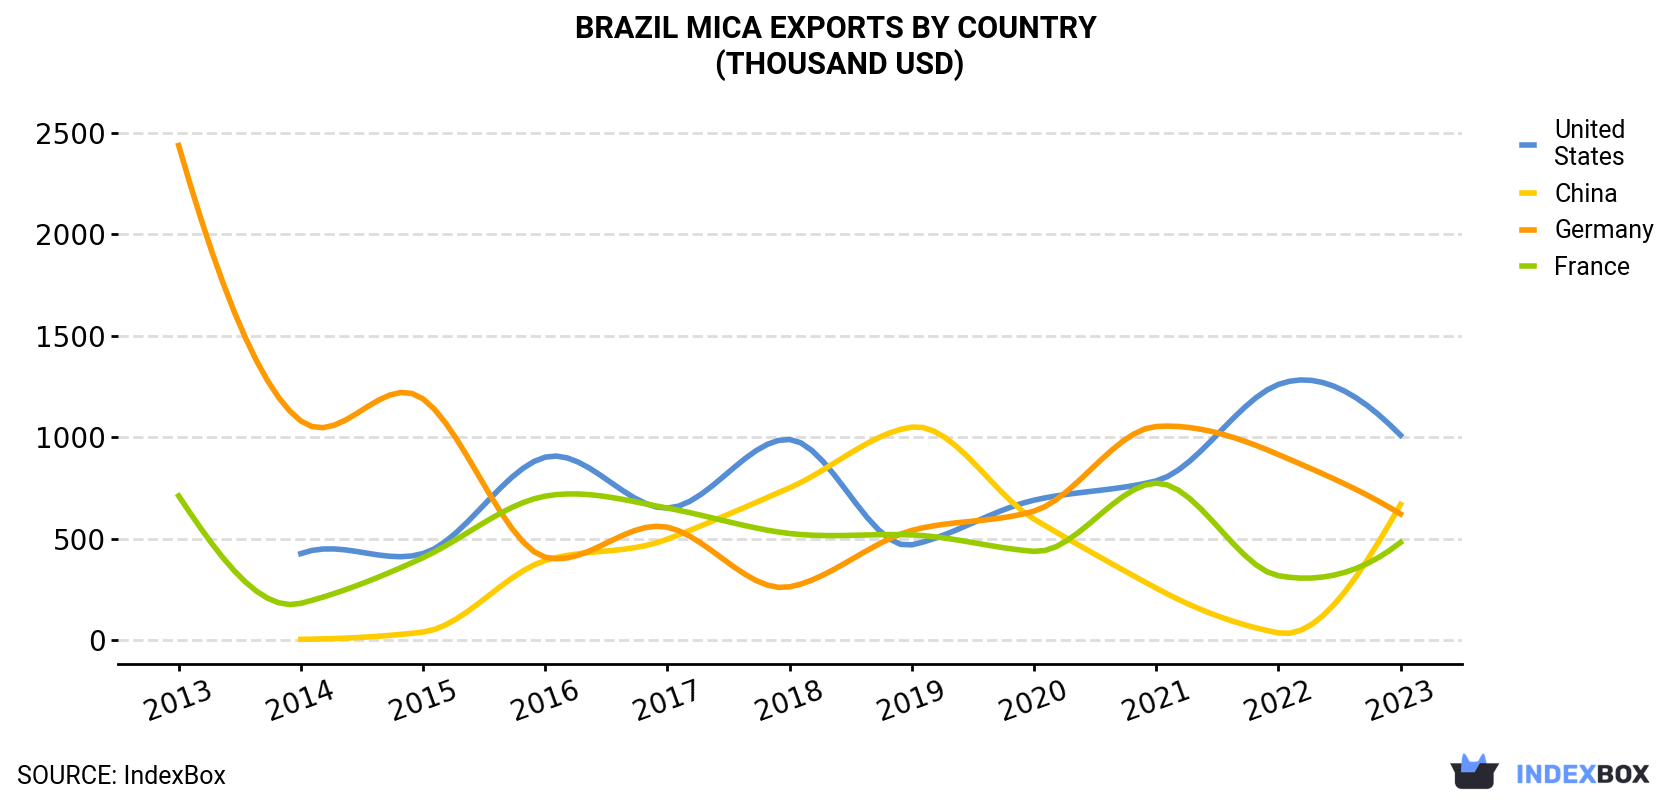 Brazil Mica Exports By Country (Thousand USD)